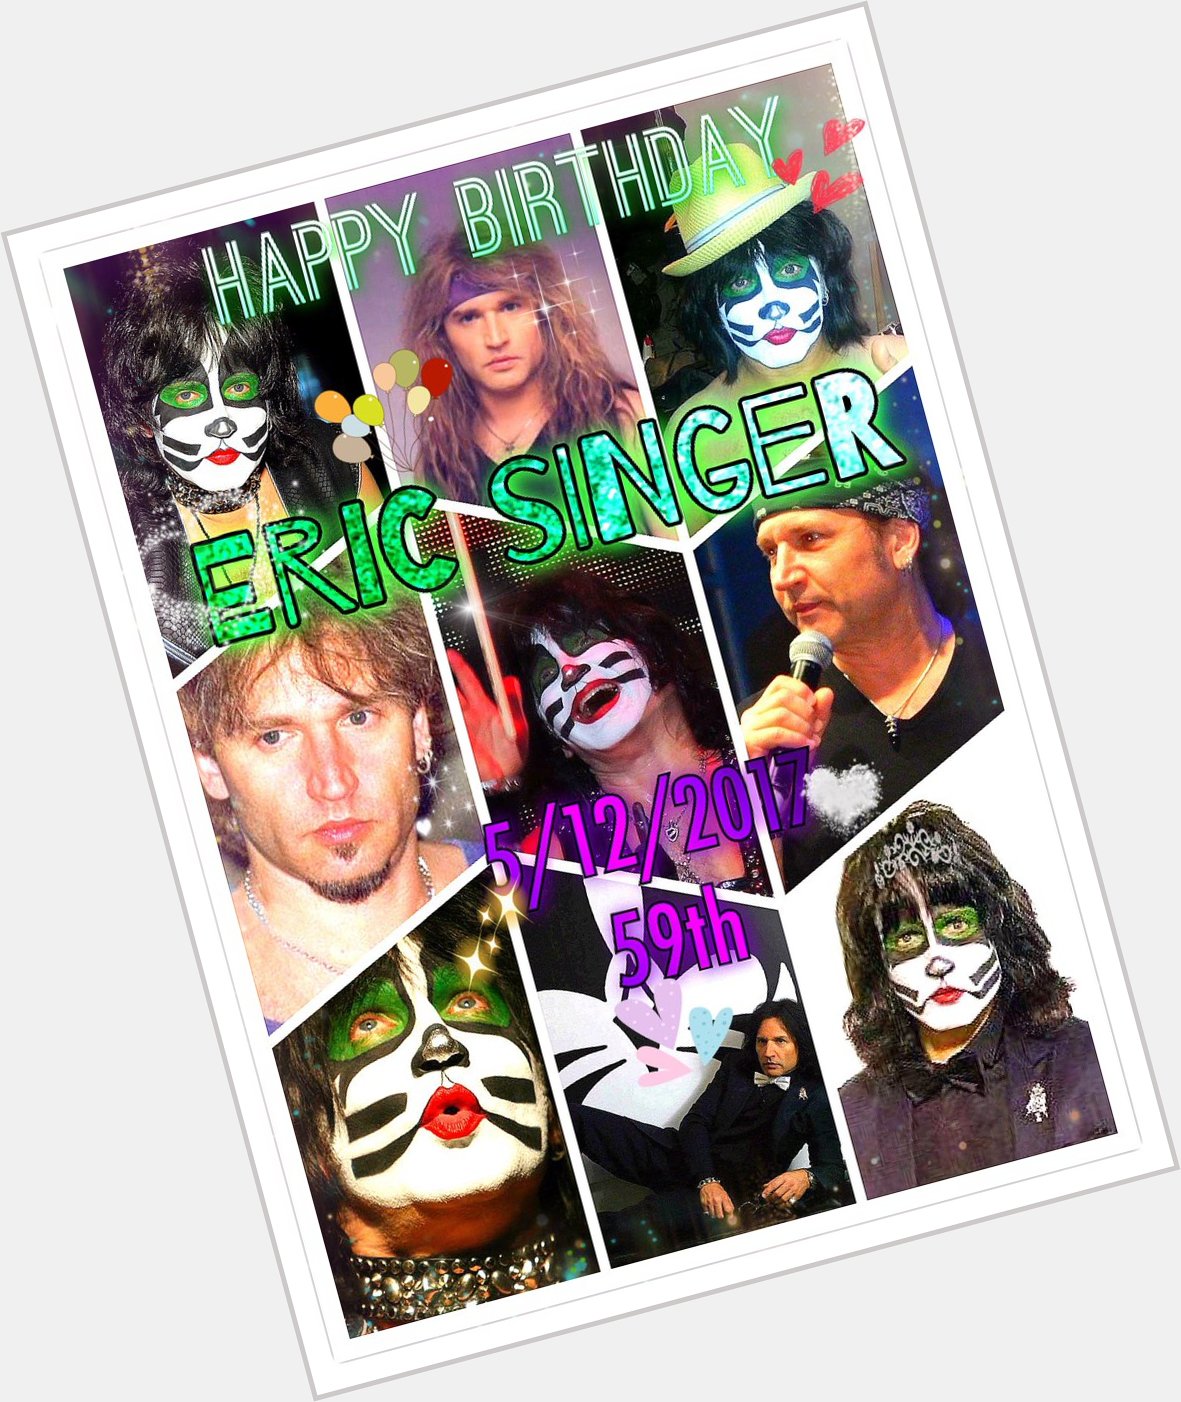 Happy Happy birthday to our great drummer Eric Singer!!        Singer 